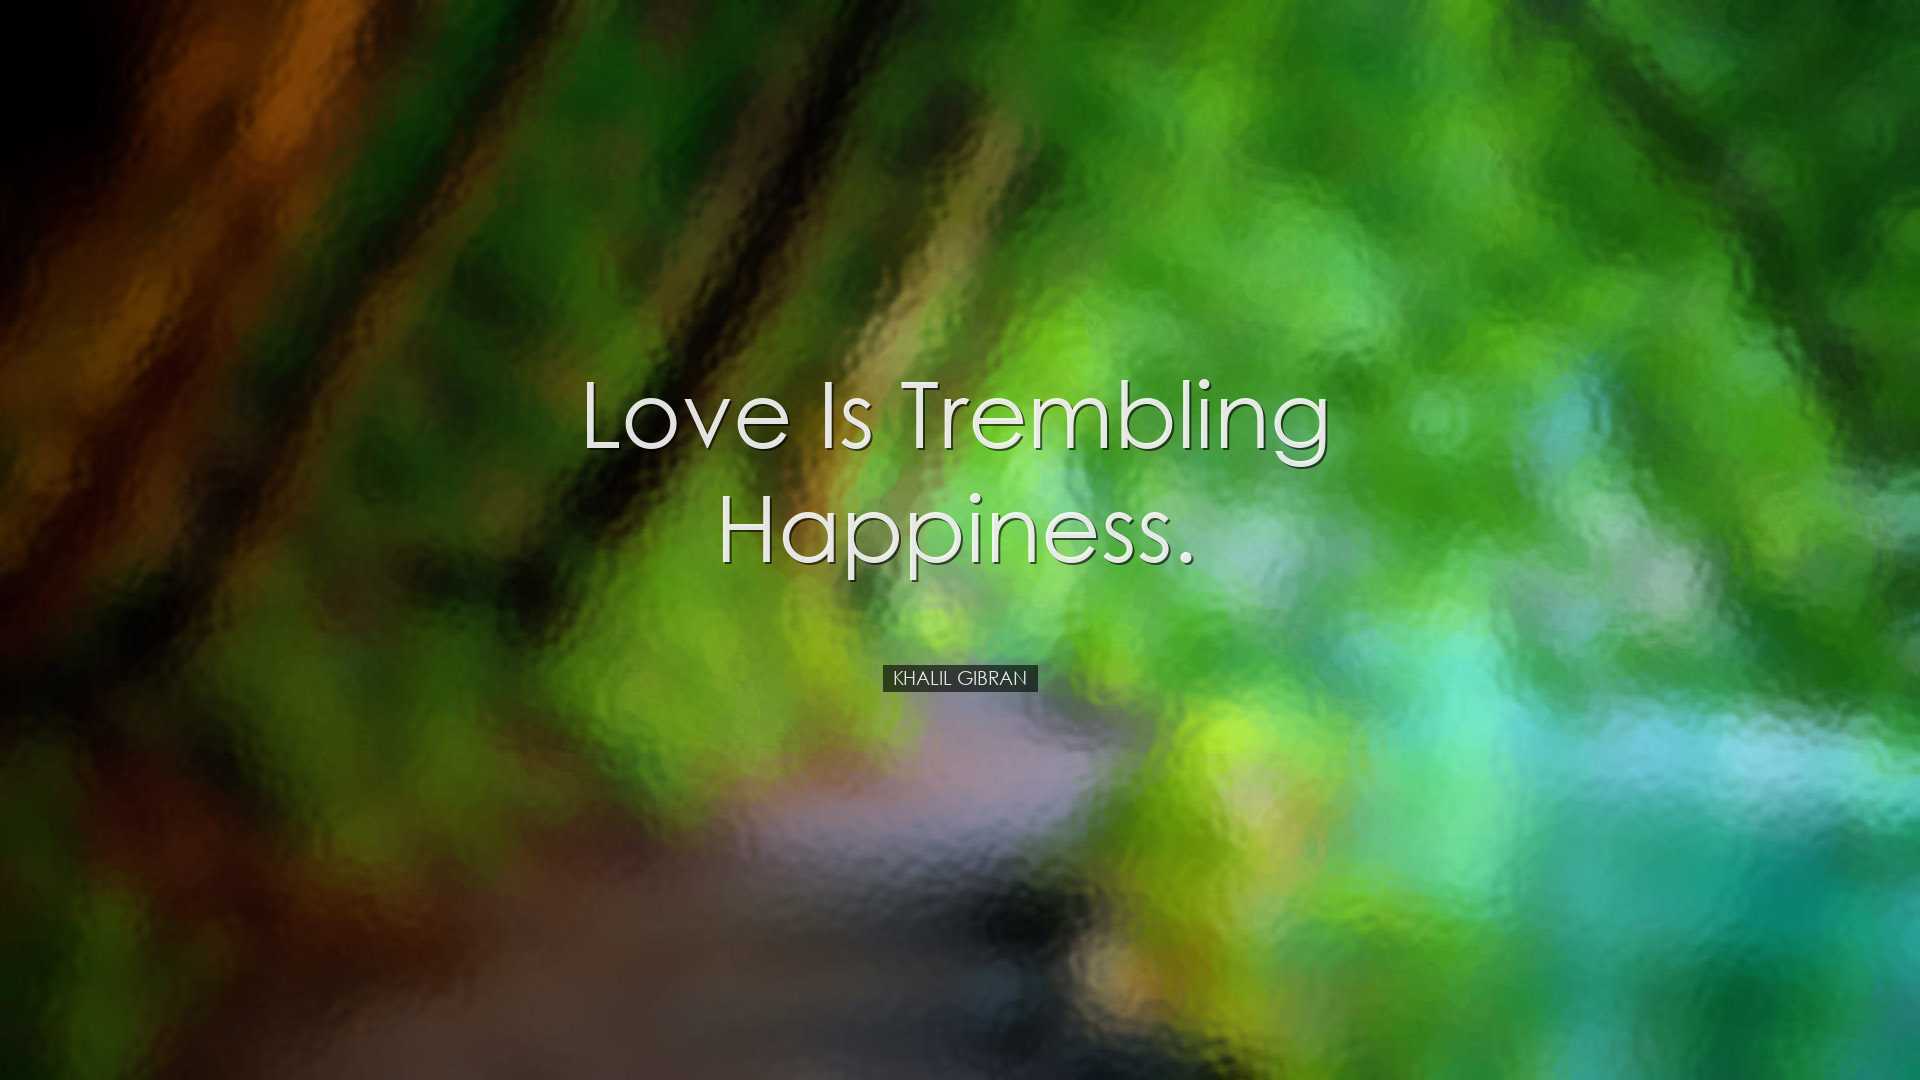 Love is trembling happiness. - Khalil Gibran